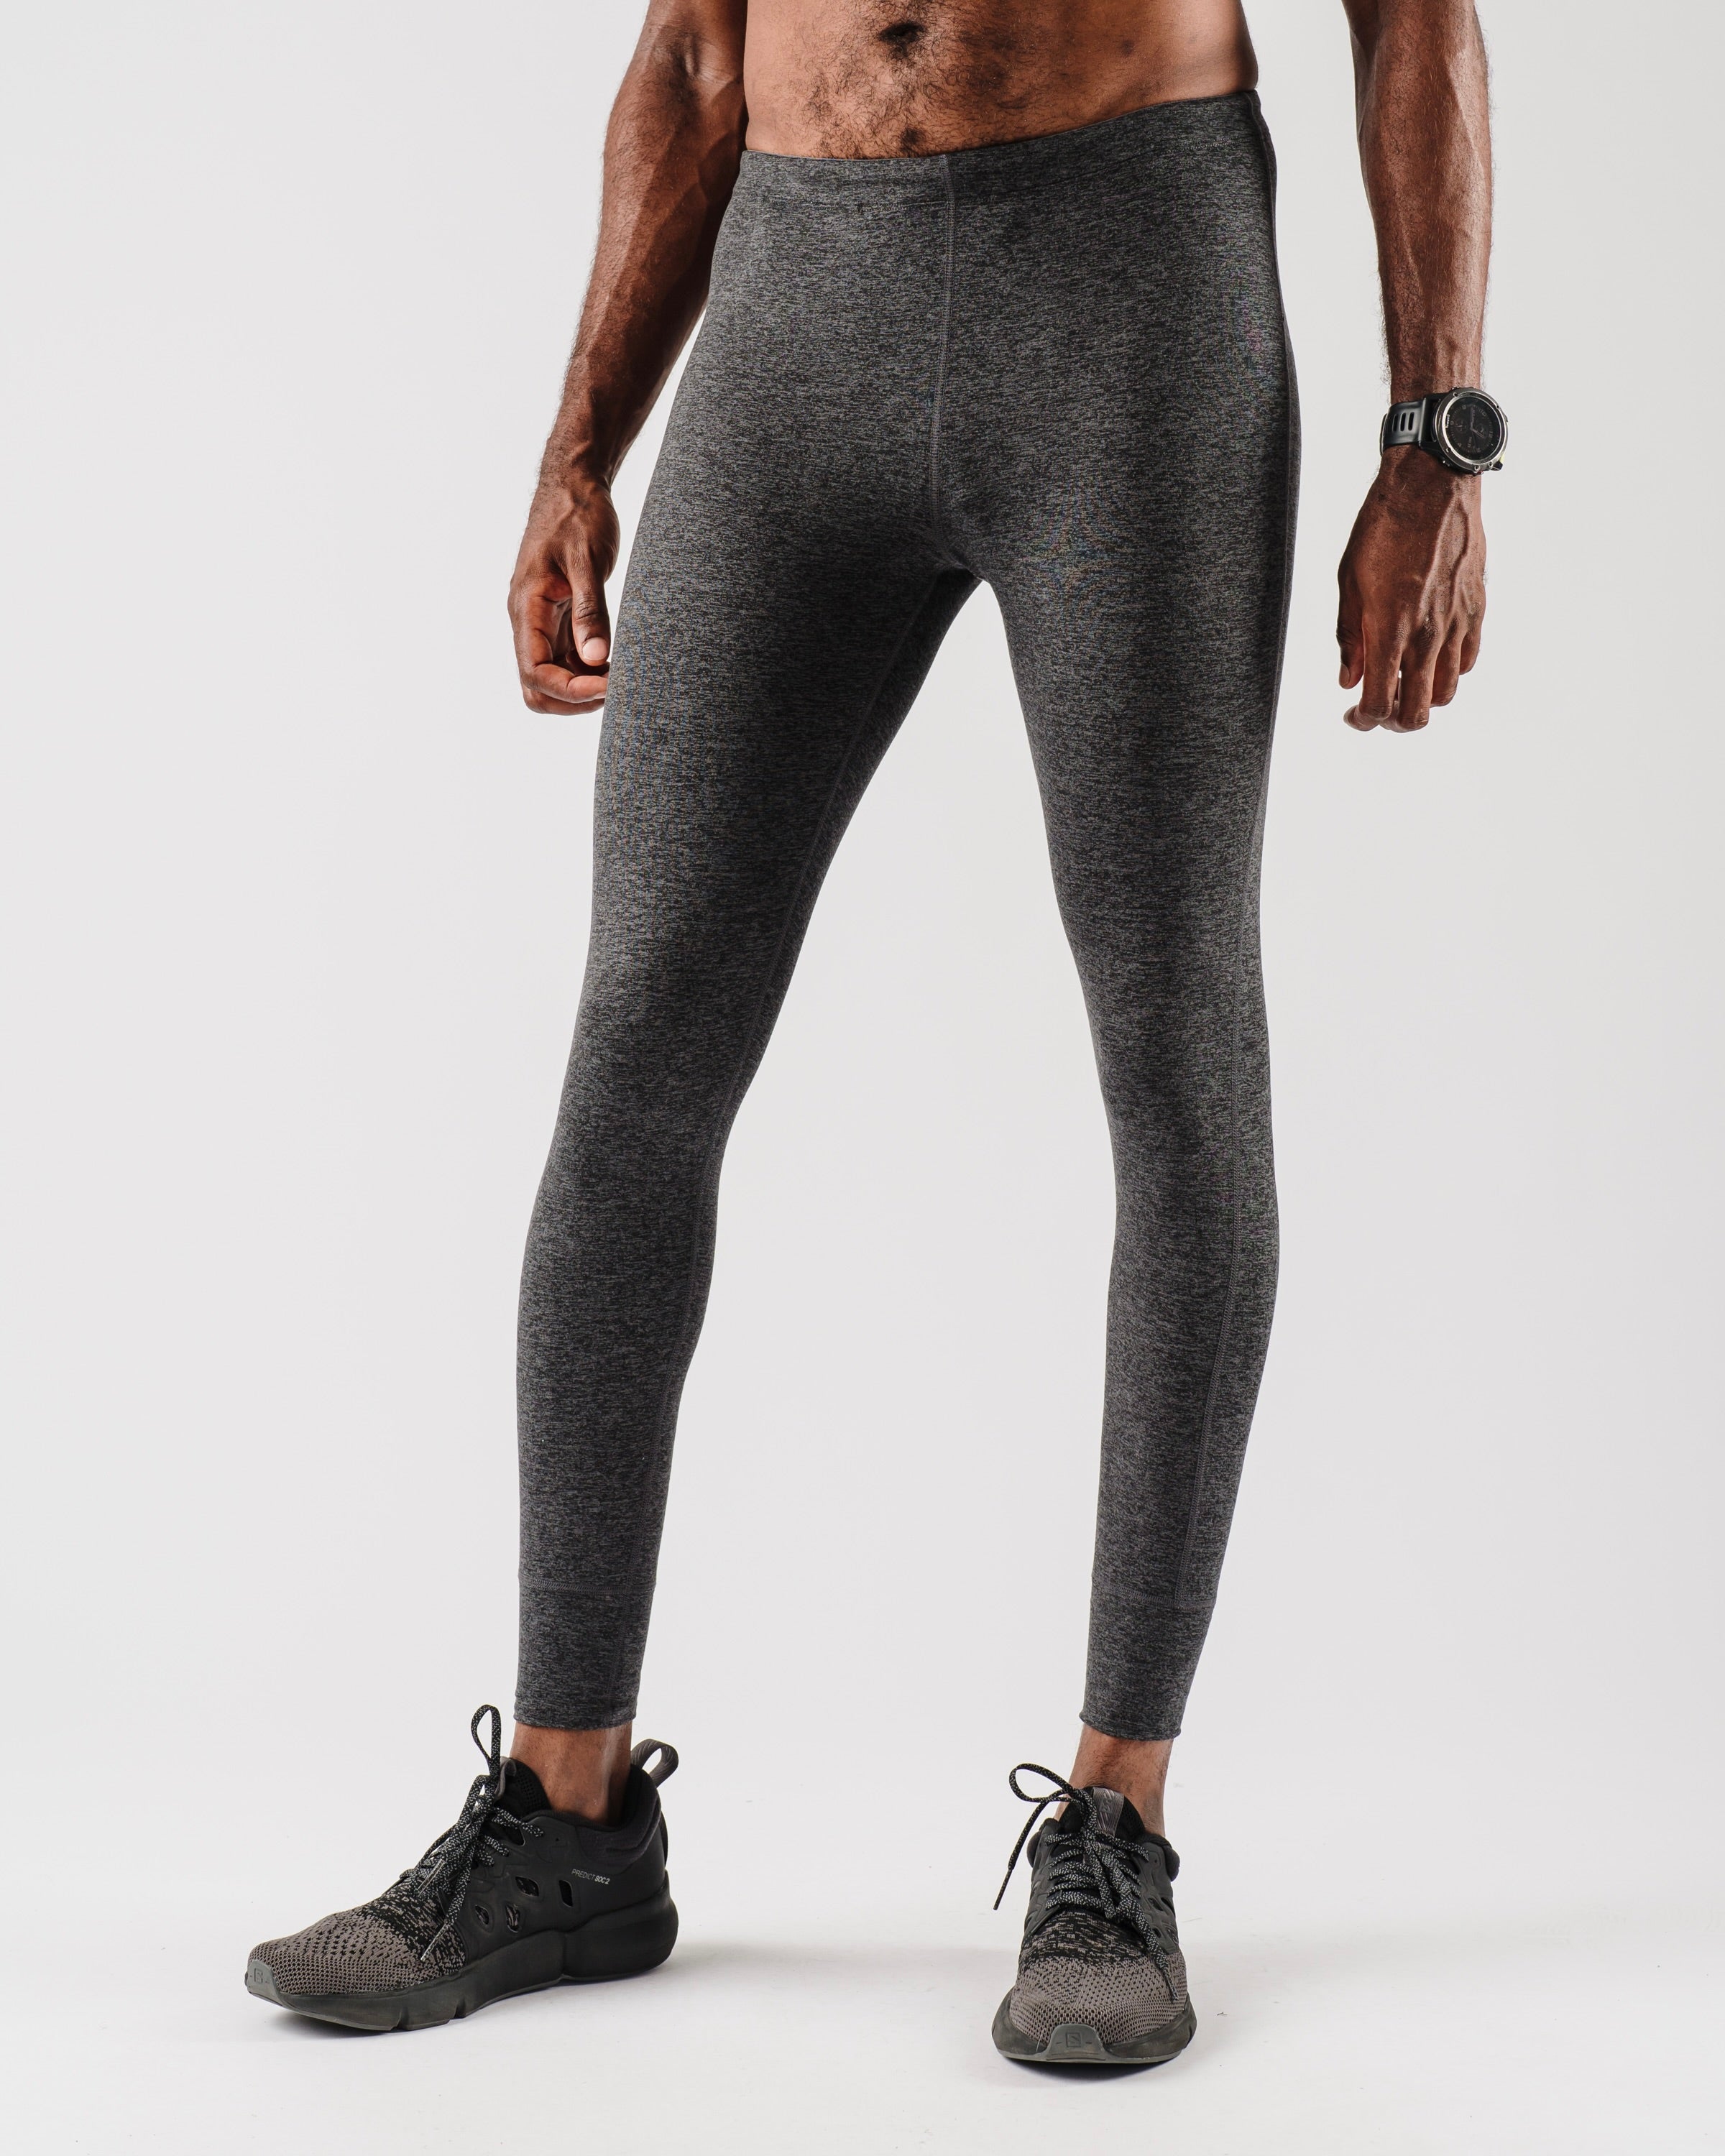 Buy The Run Tights for men